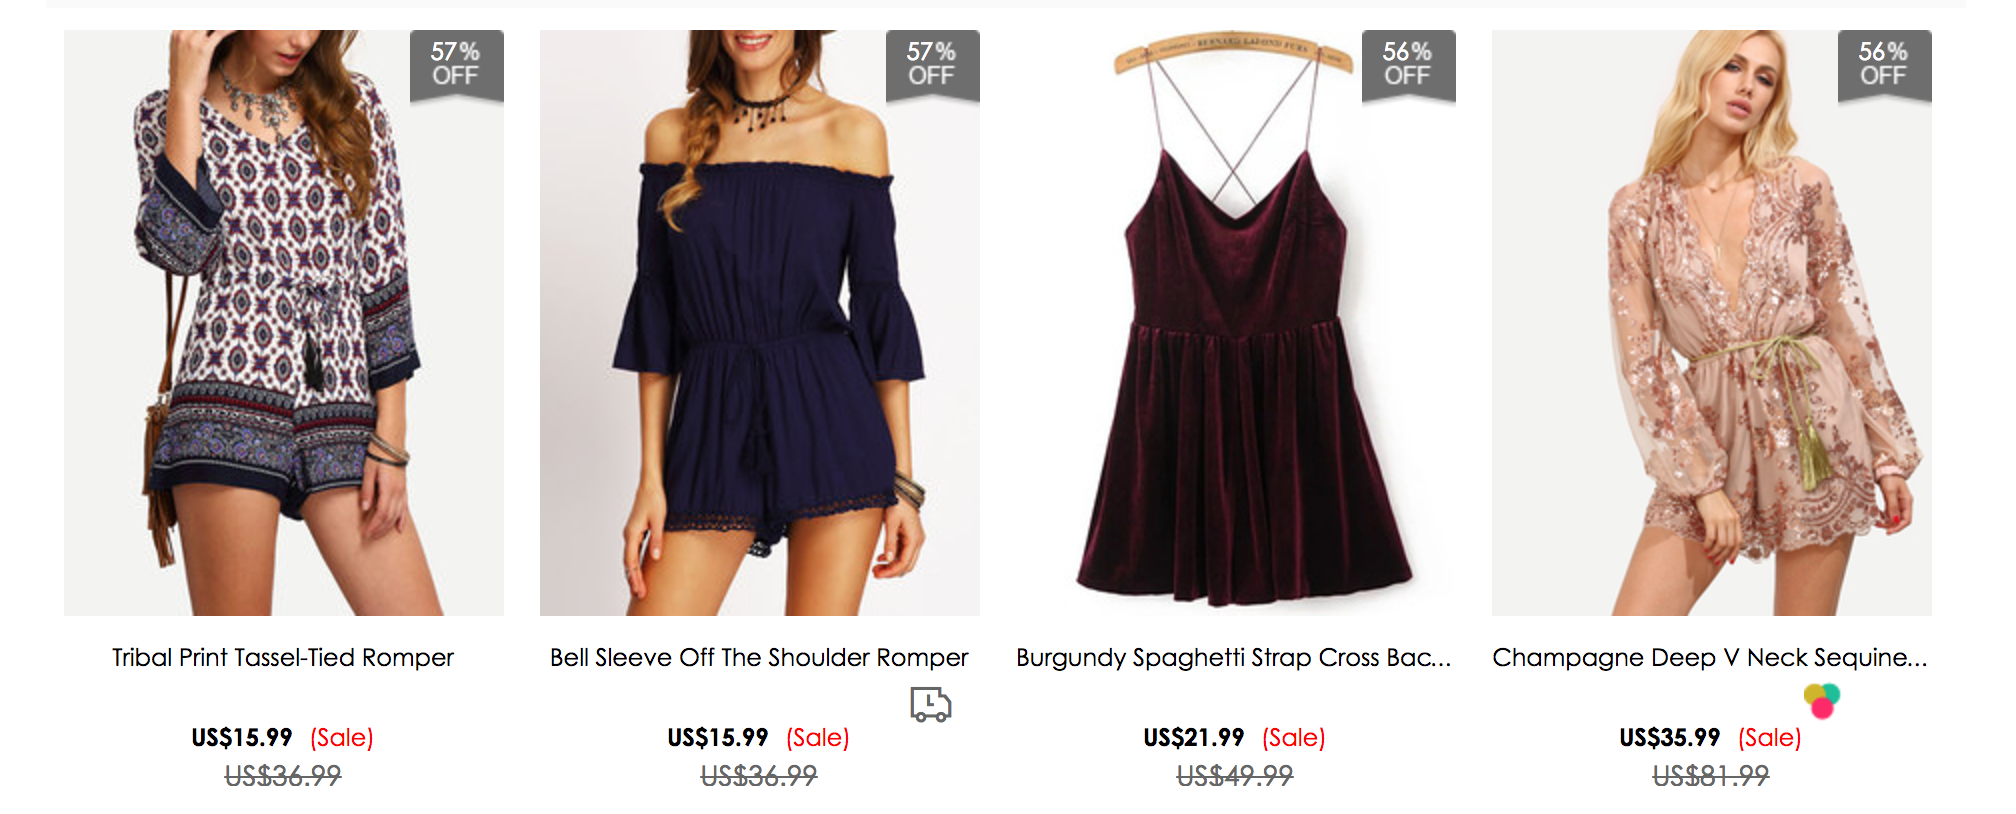 Rompers under $100